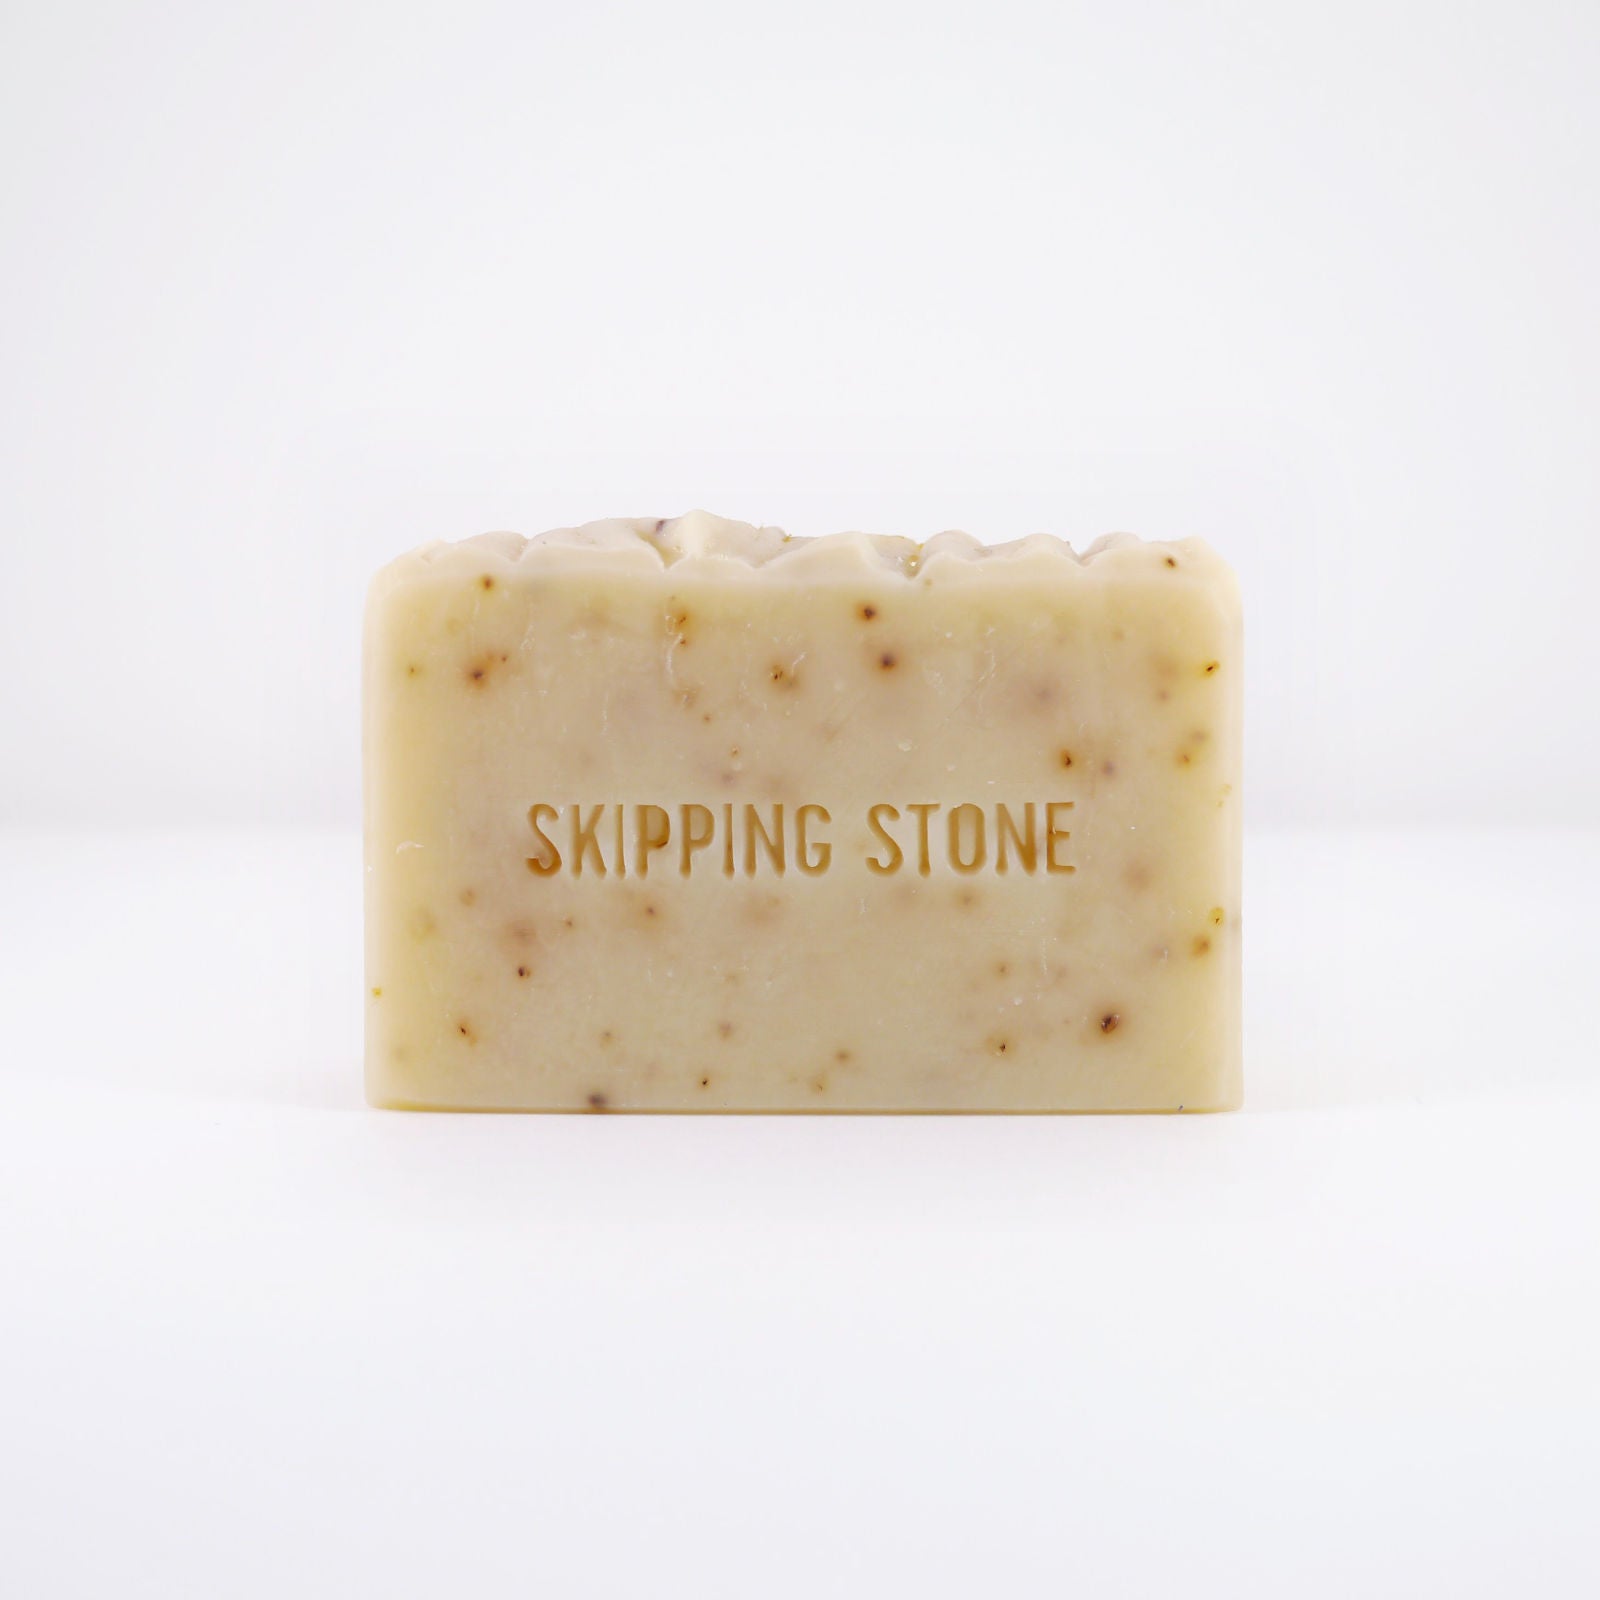 Skipping Stone Soap Northern Pine Body + Face Soap